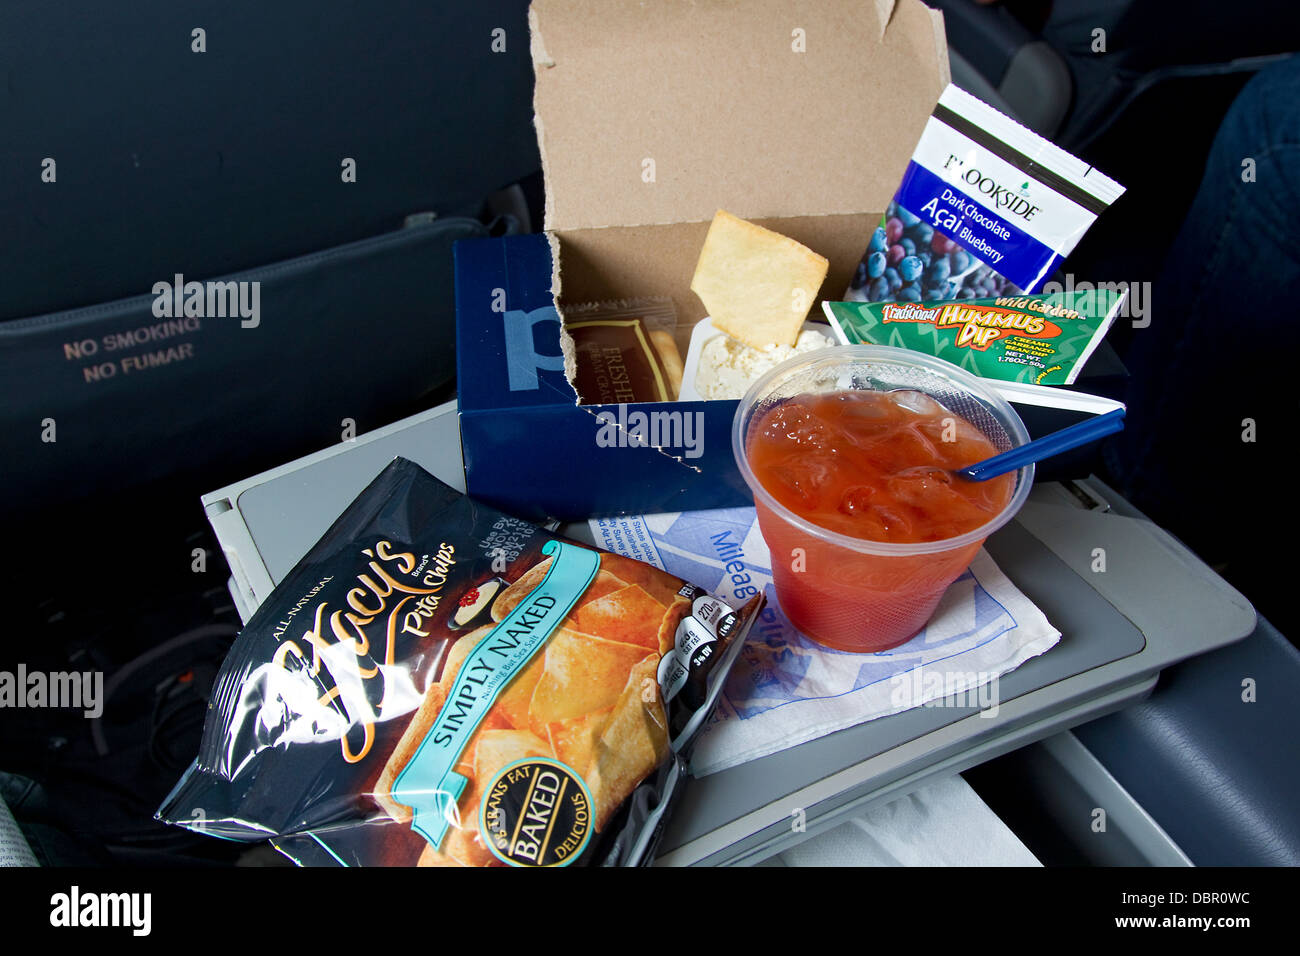 Airplane snack food on First Class flight Stock Photo - Alamy